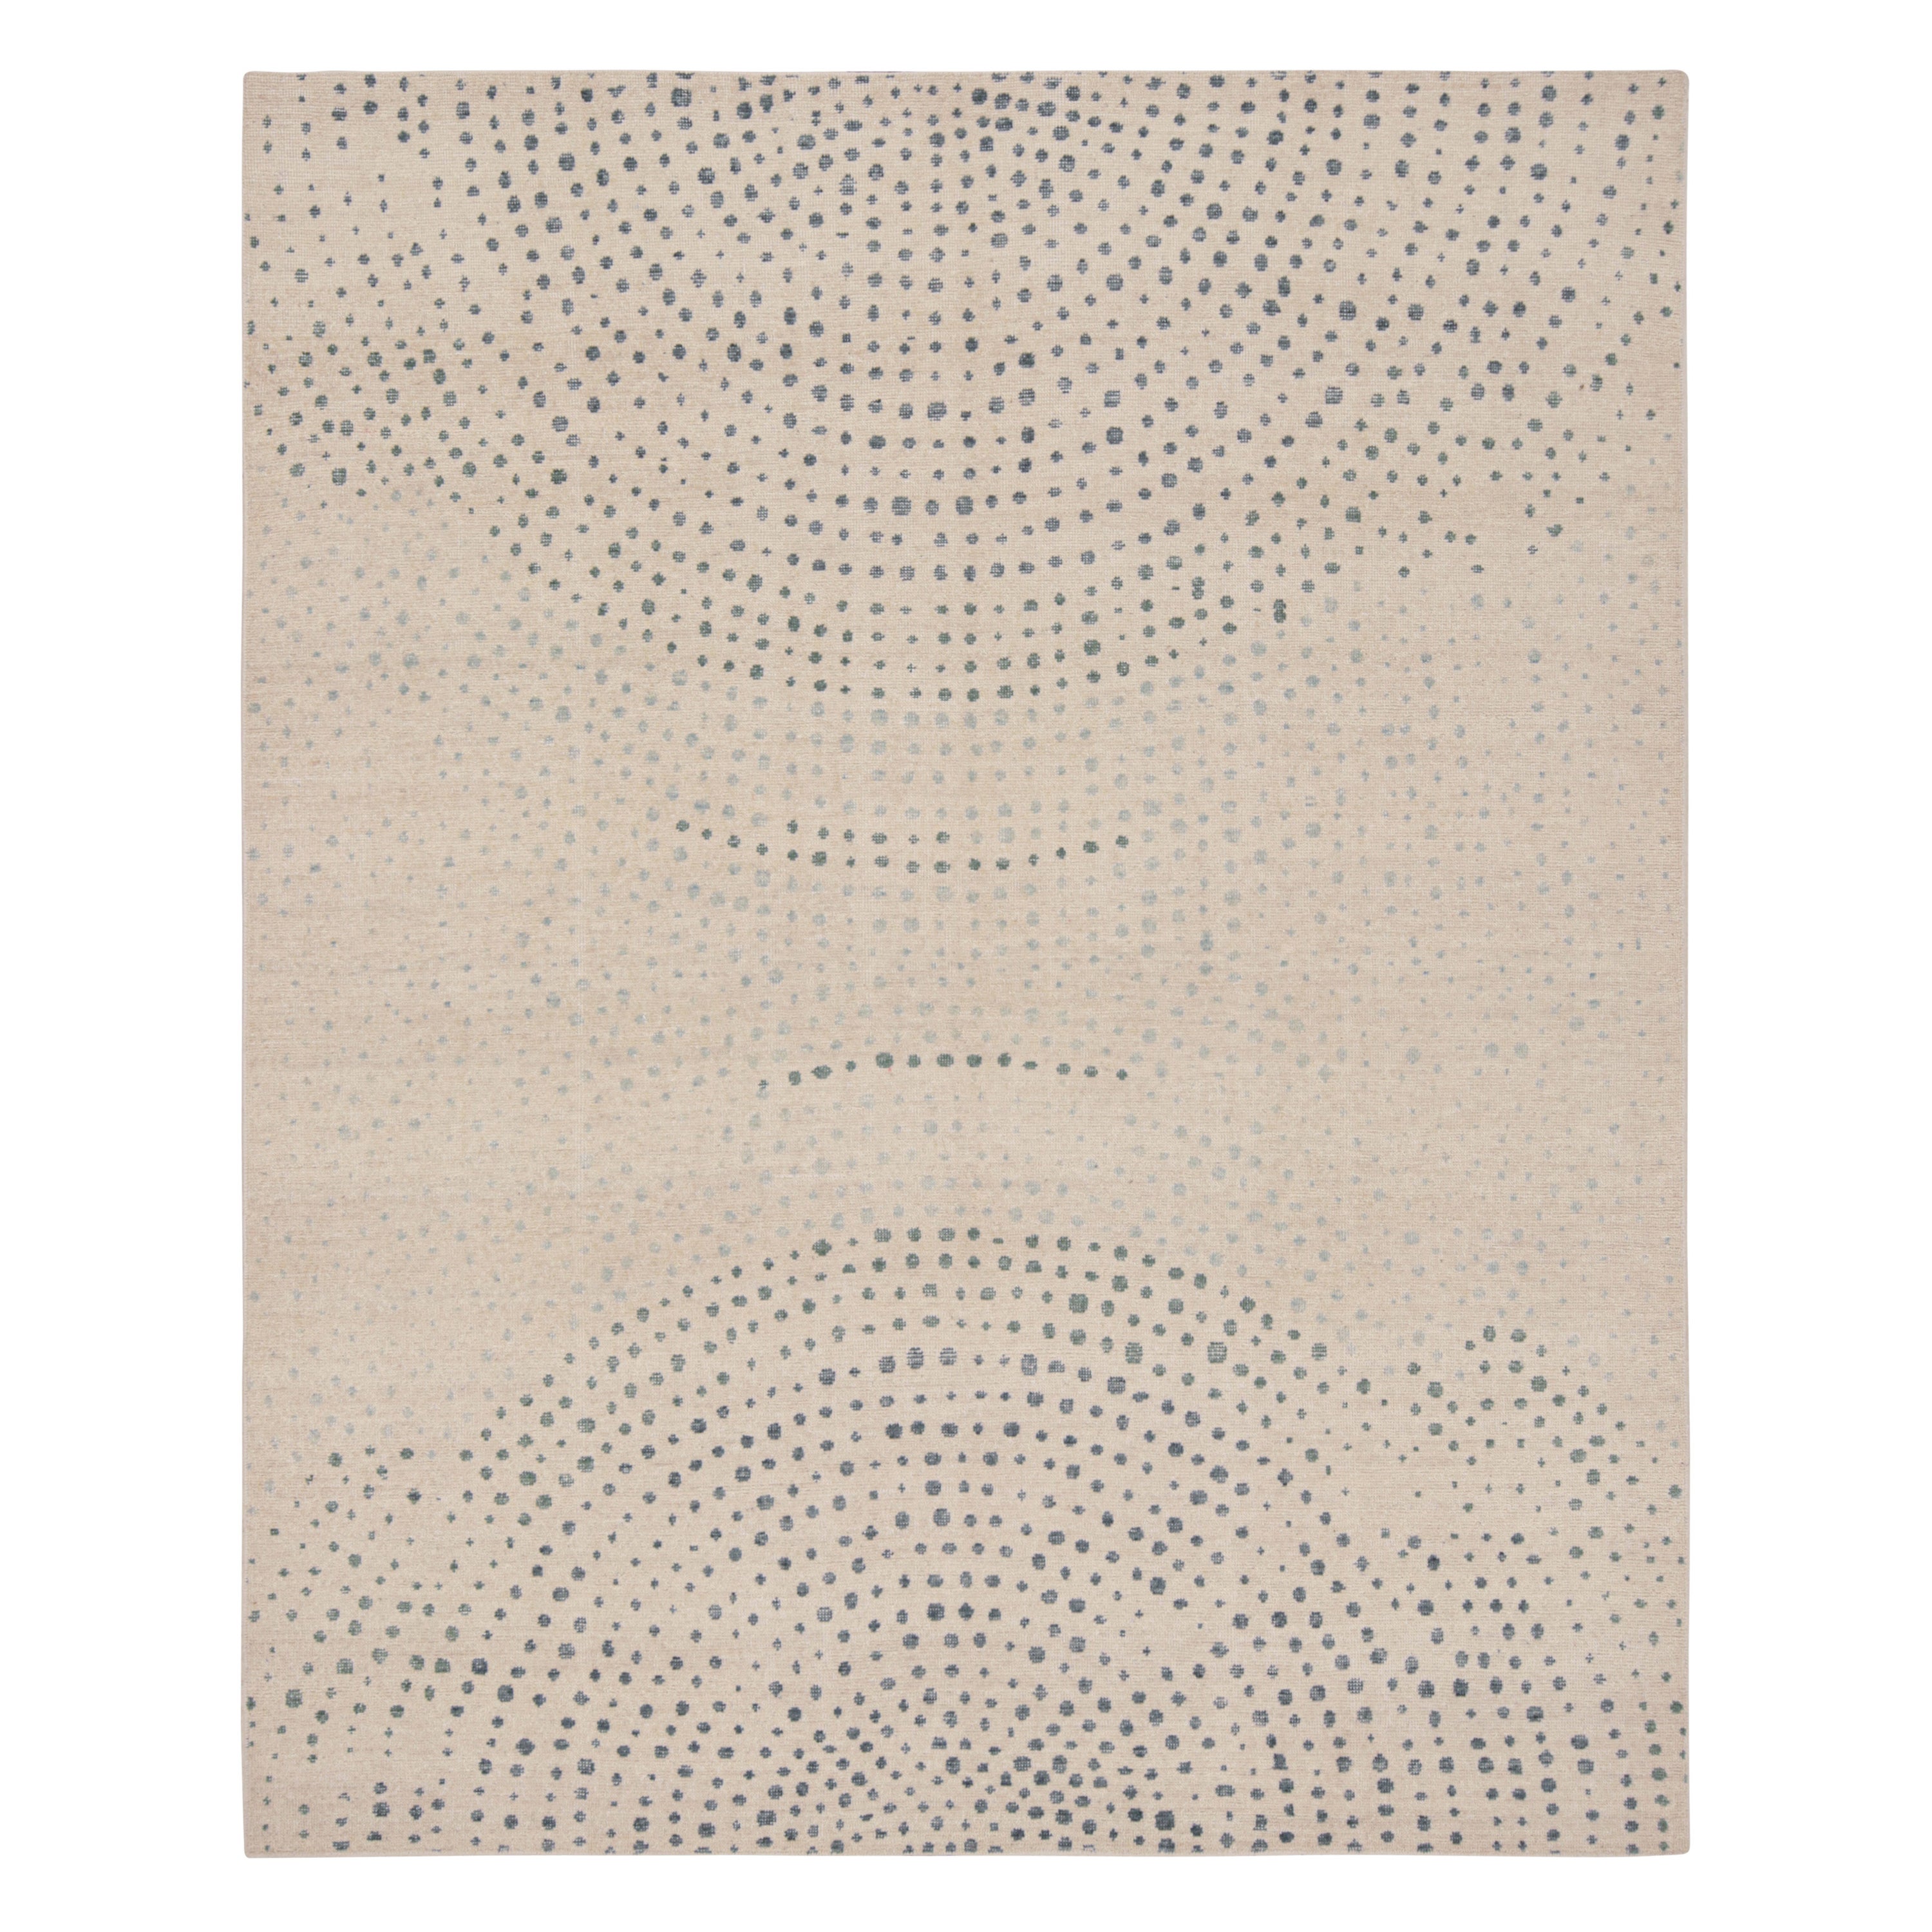 Rug & Kilim’s Modern Abstract Rug in Beige with Blue Dot Patterns 